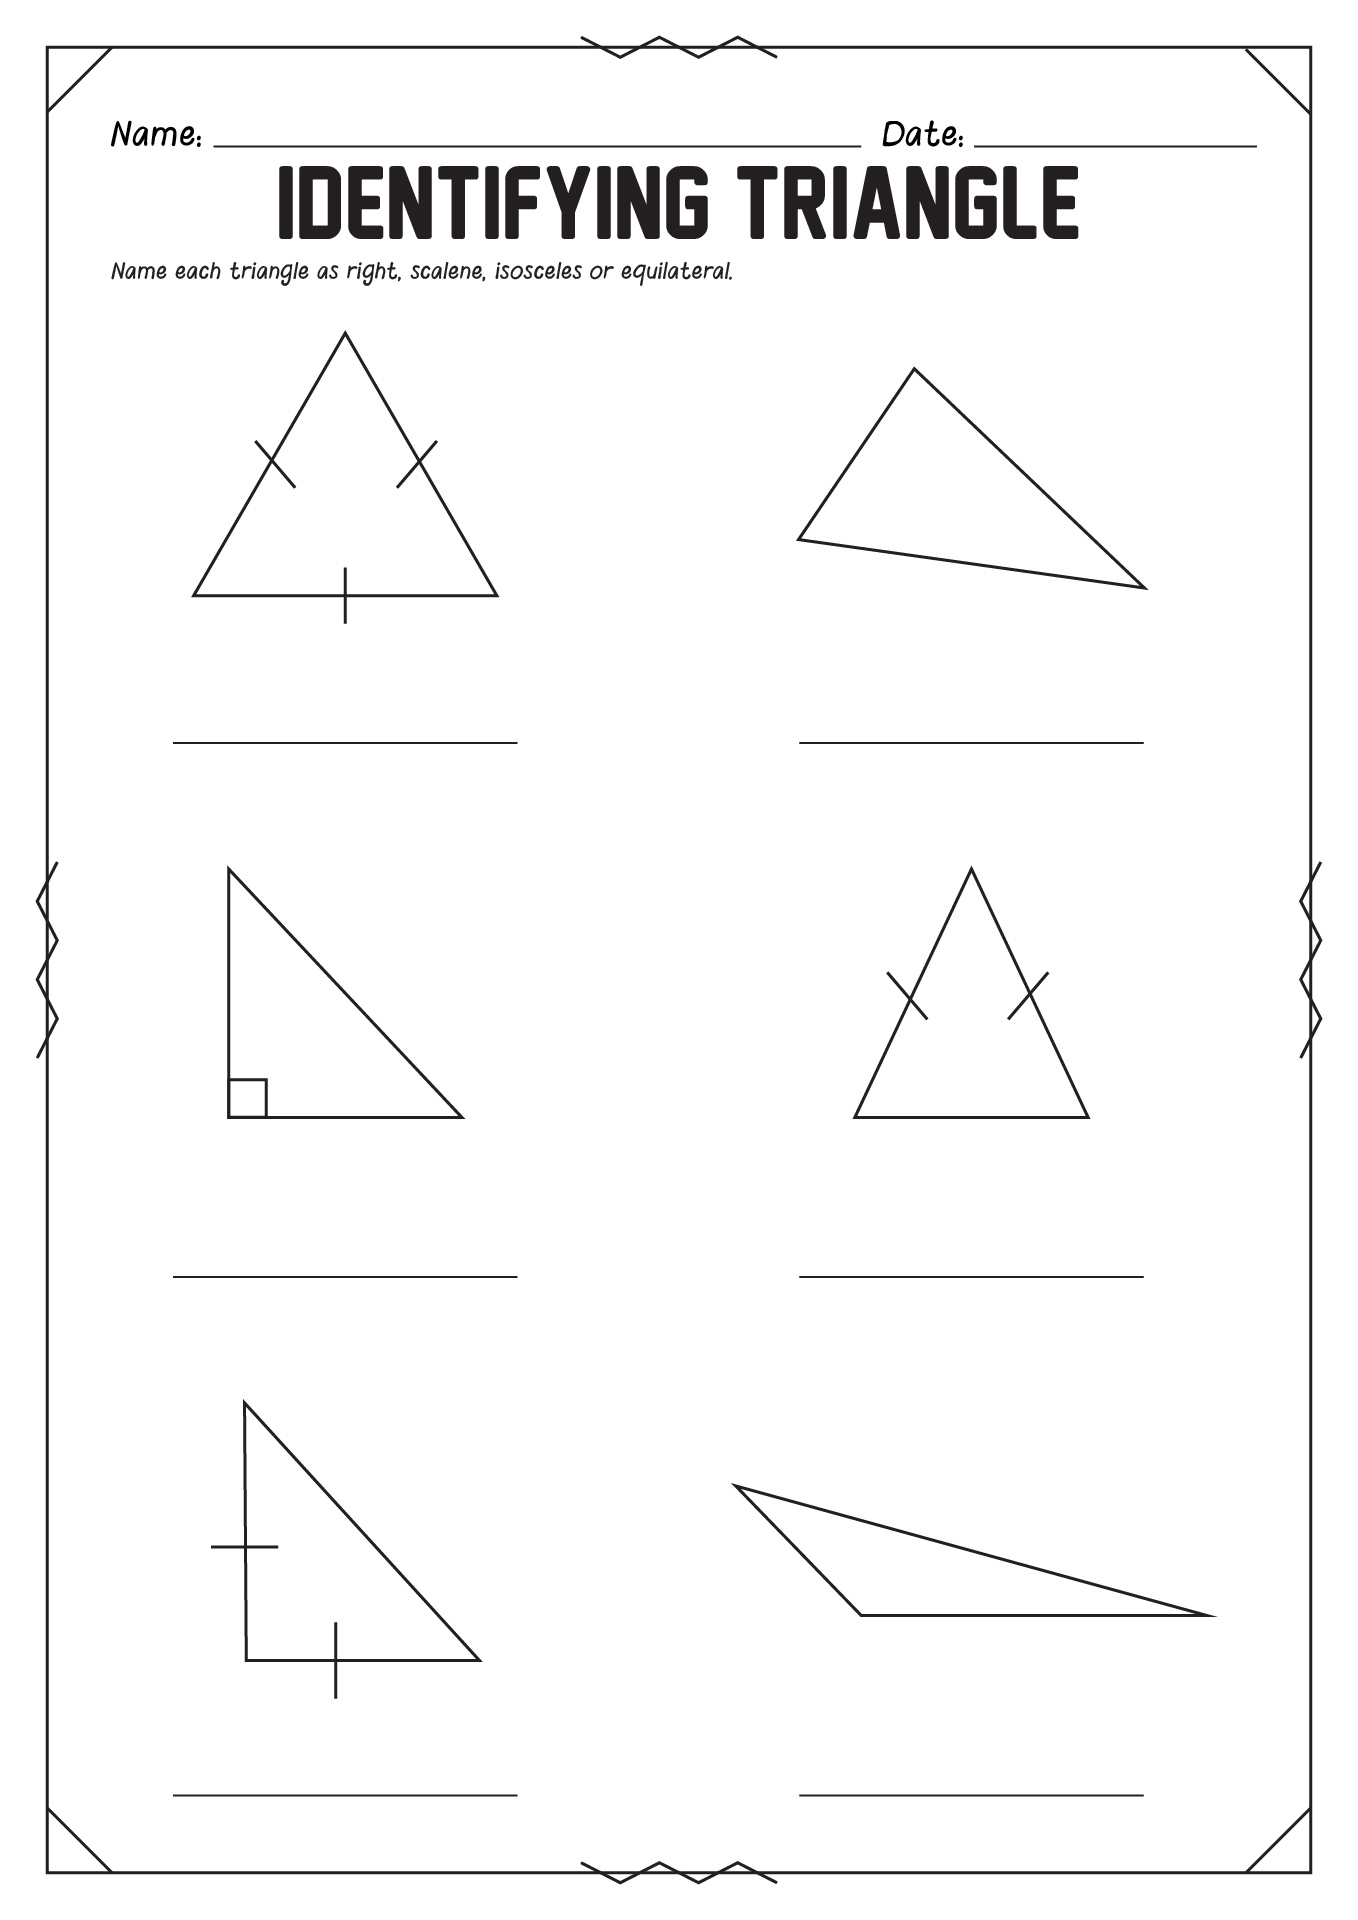 17 Best Images of Geometry Angles Worksheet 4th Grade - Area and